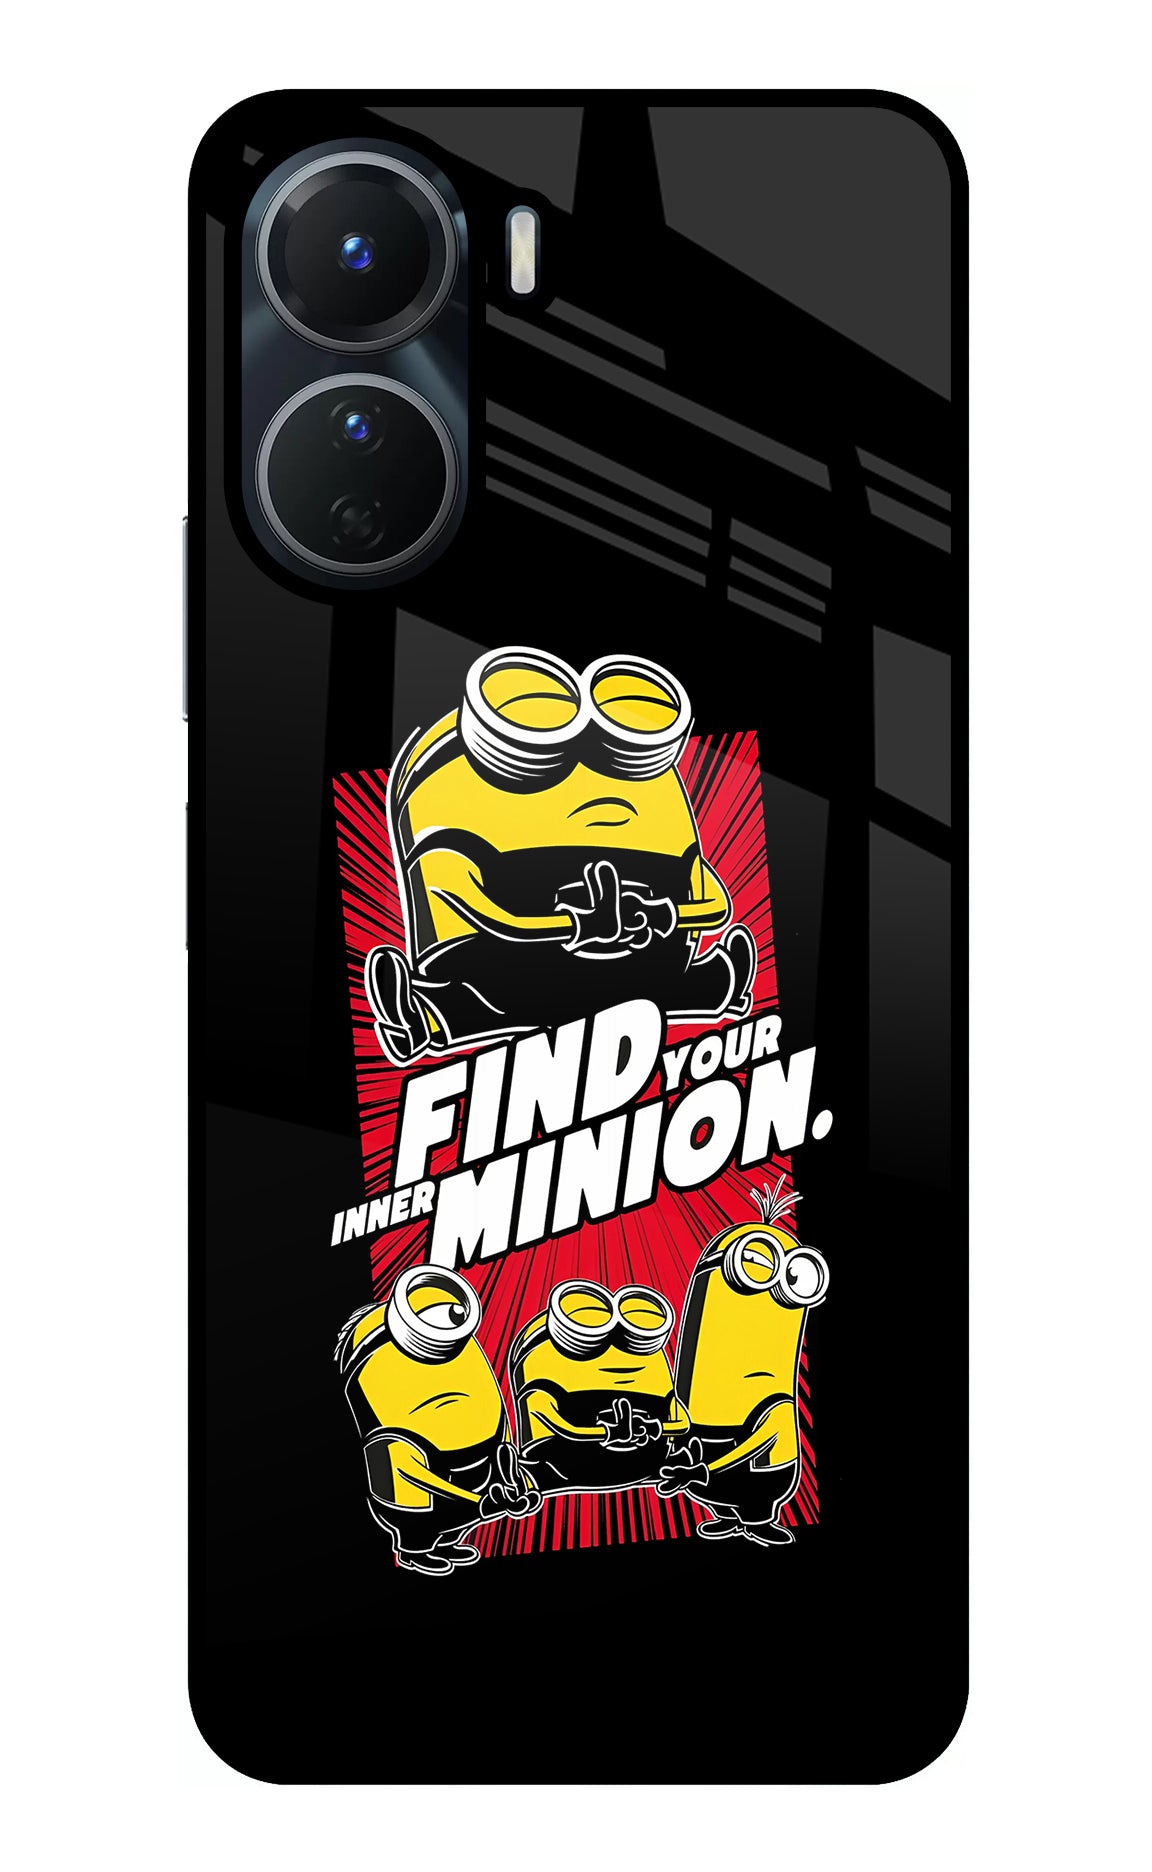 Find your inner Minion Vivo T2x 5G Back Cover